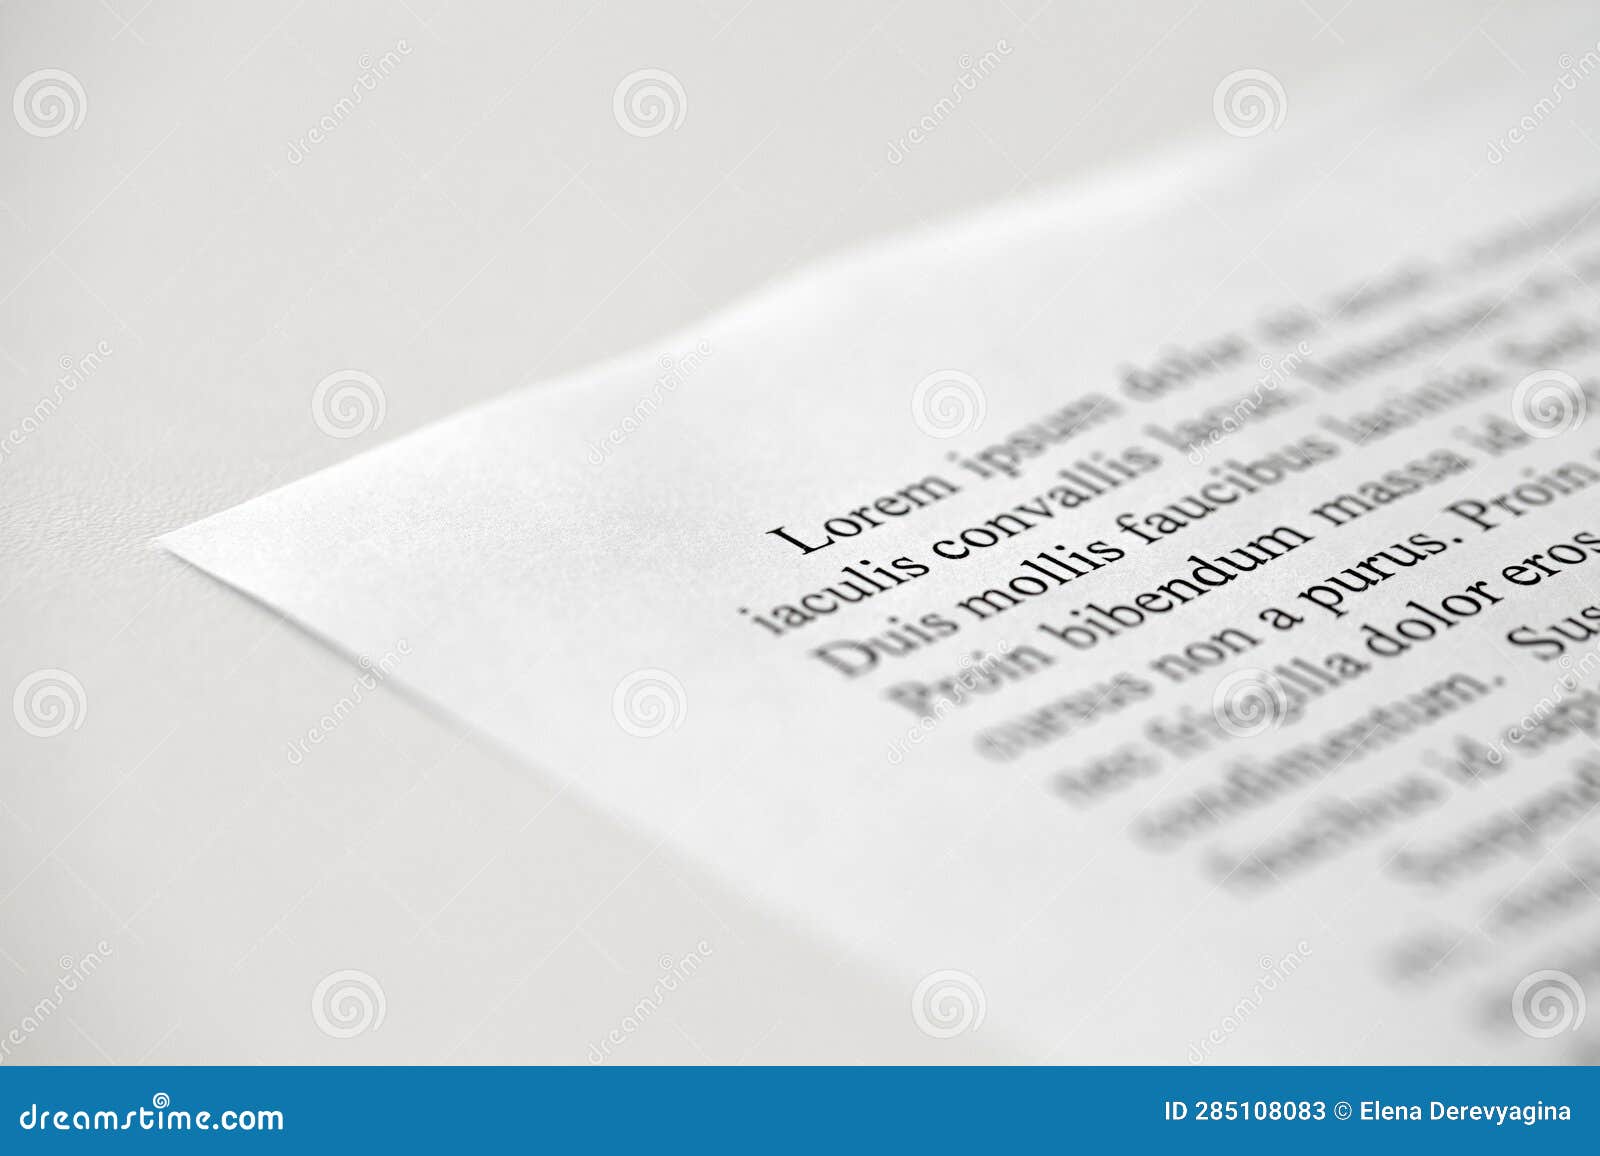 lorem ipsum dolor text on printed on paper in black and white, sample of document, side view, selective focus